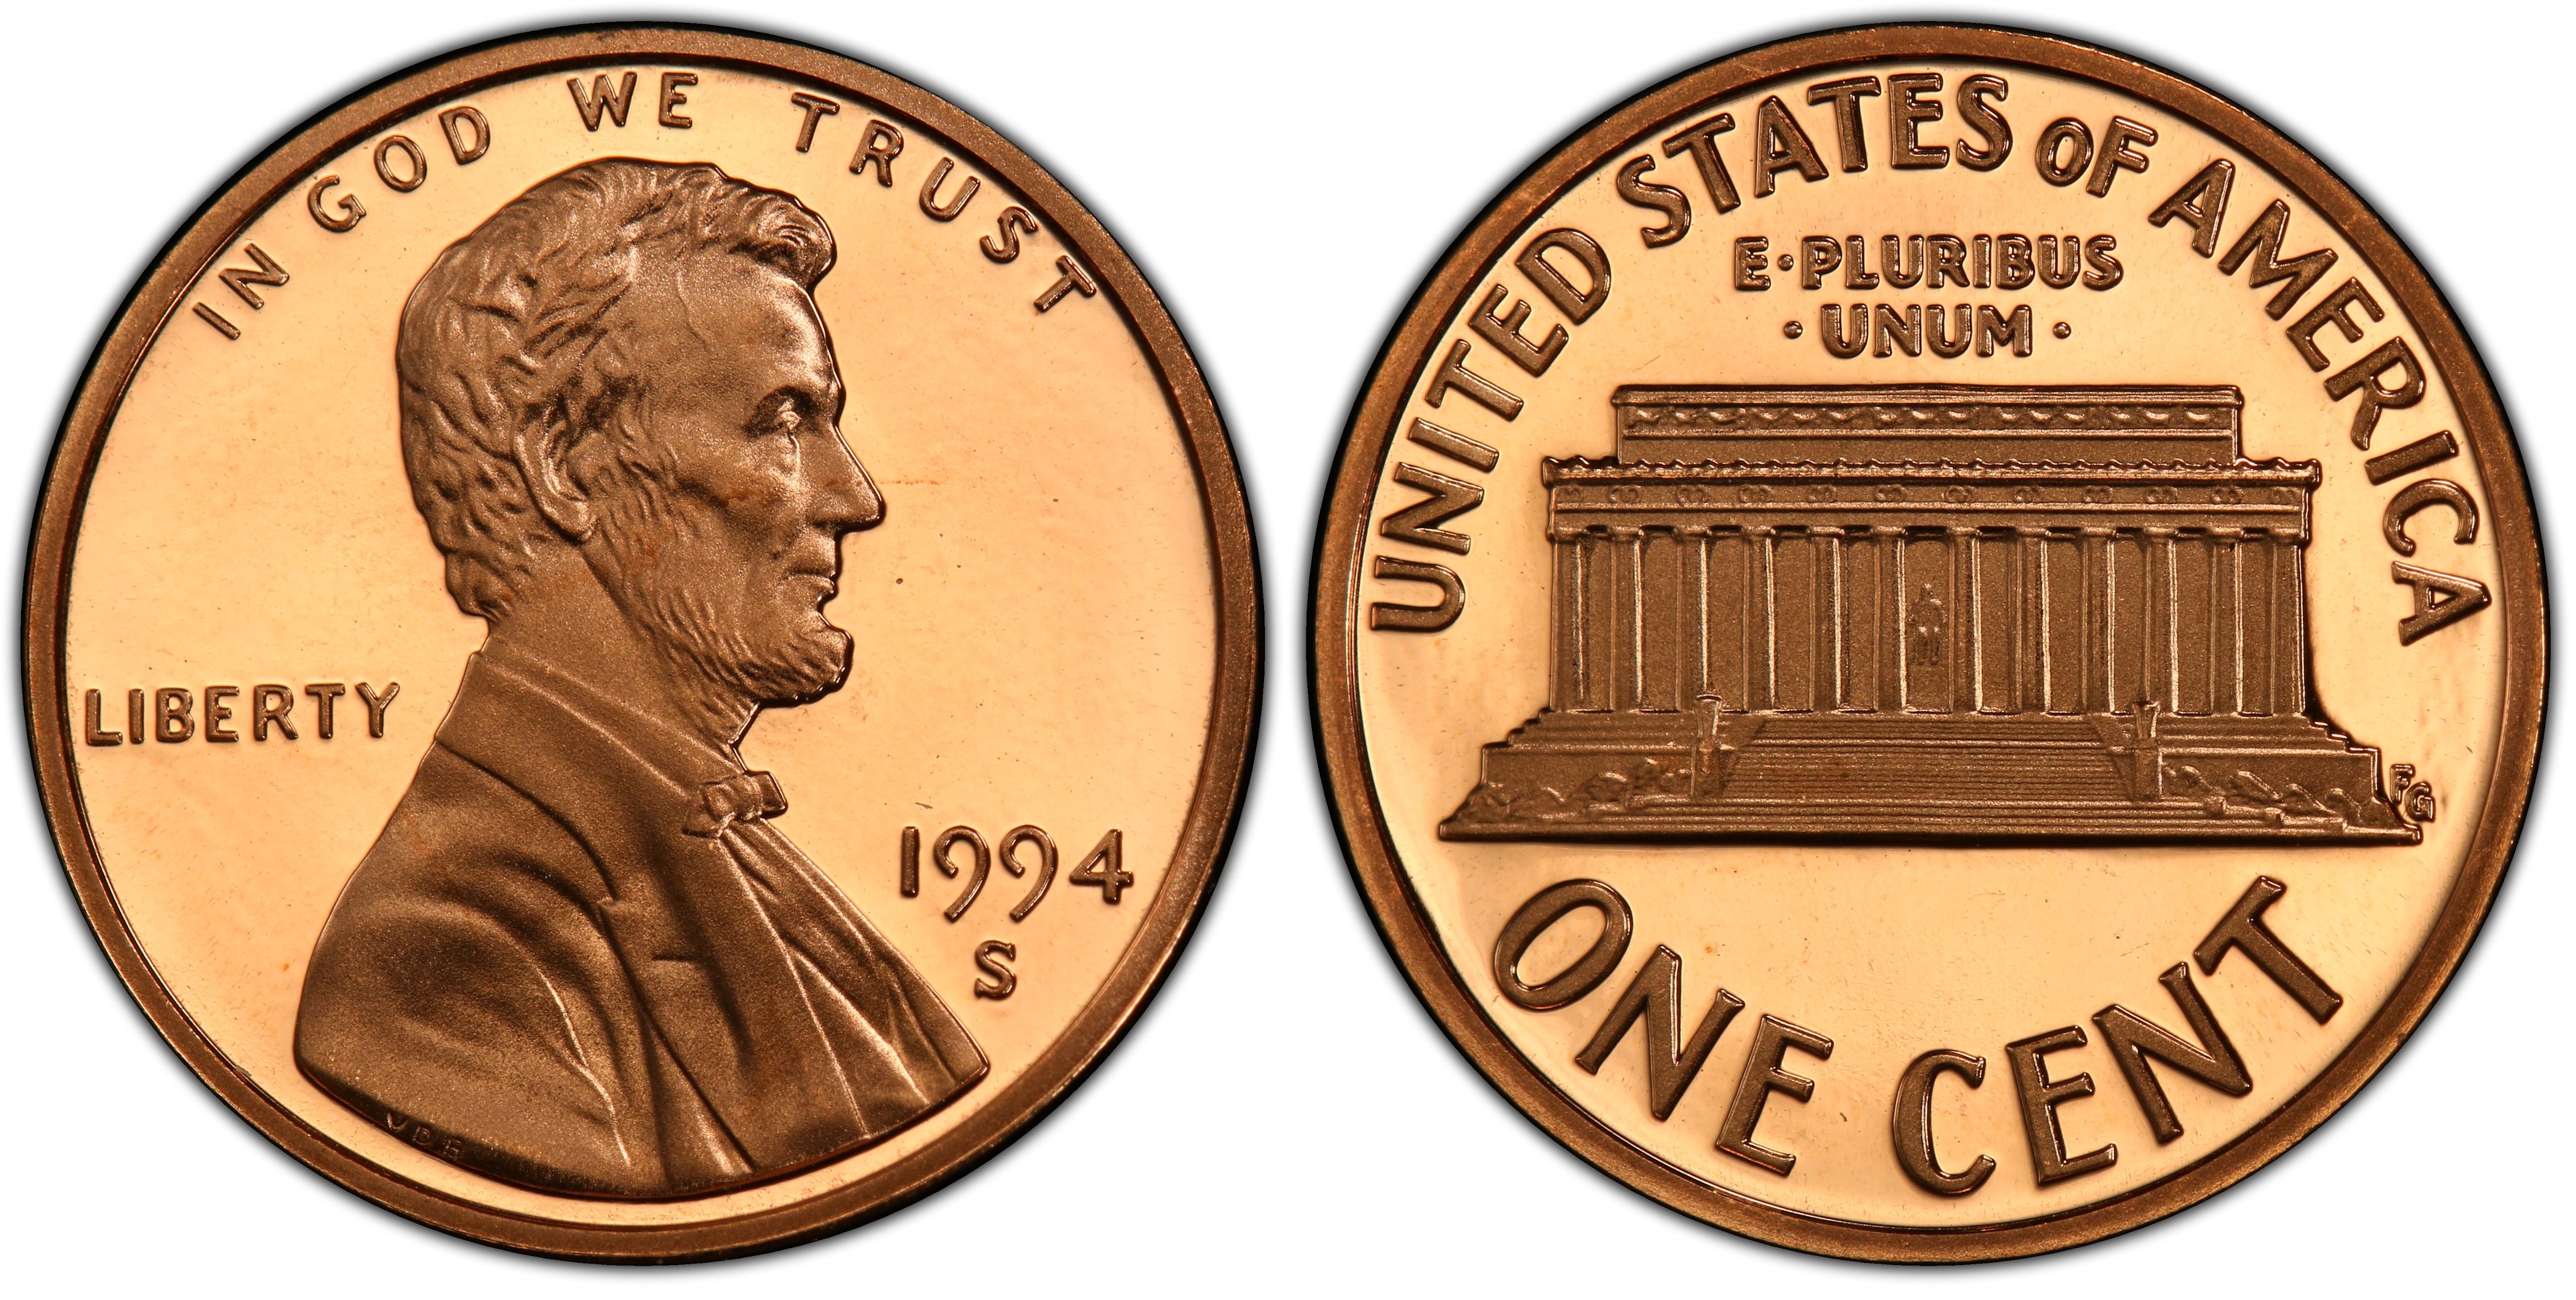 1994-S PROOF LINCOLN CENT ULTRA CAMEO HIGH GRADE SUBMITT FOR GRADING,SUPER NICE 